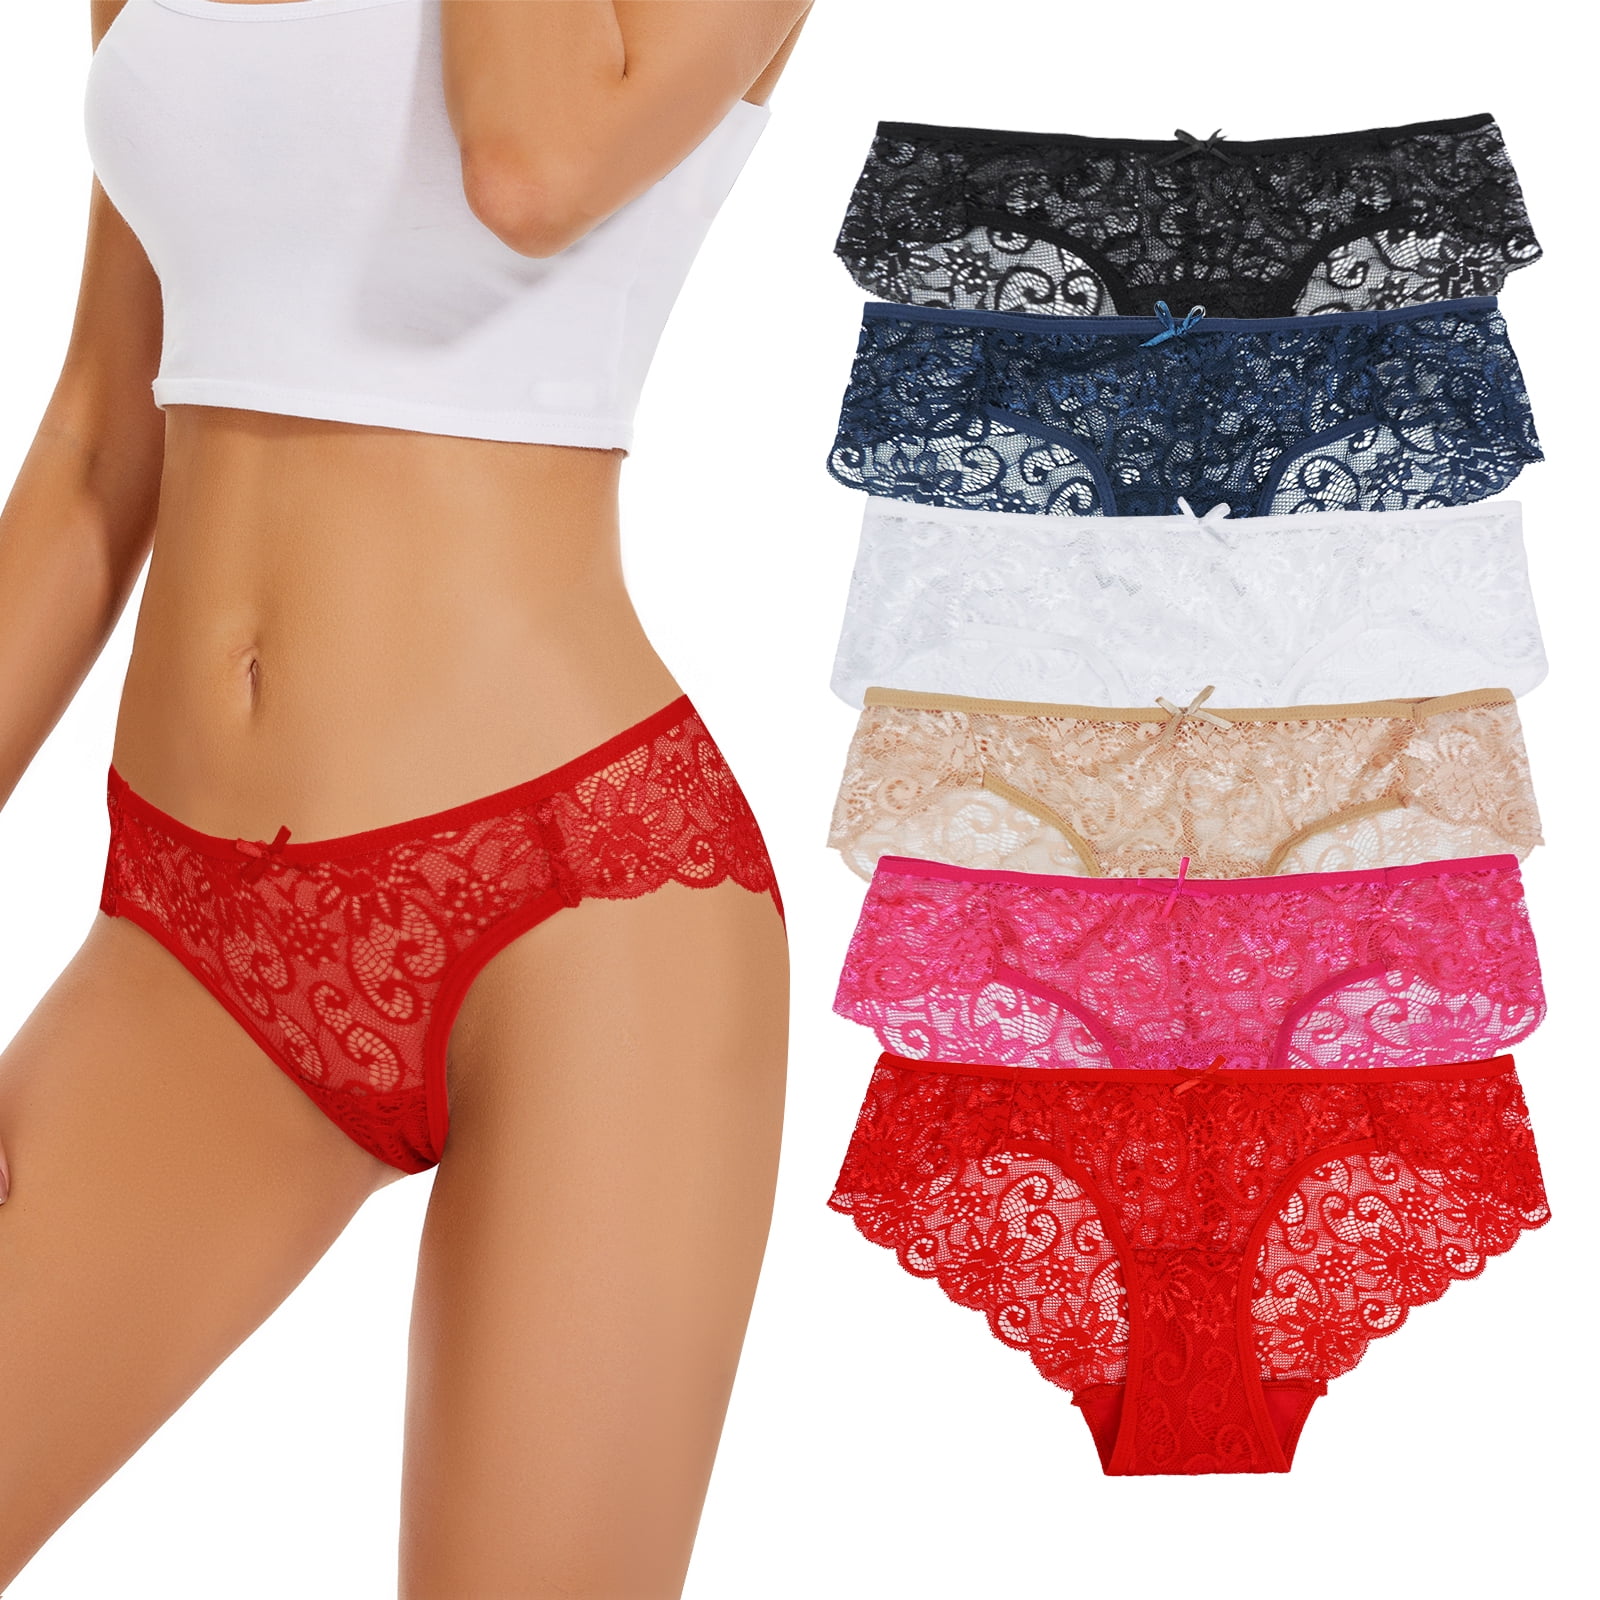 Sunm Boutique Lace Panties Cotton Underwear for Women Plus Size Cheeky  Panties for women Hipster 6 pack 